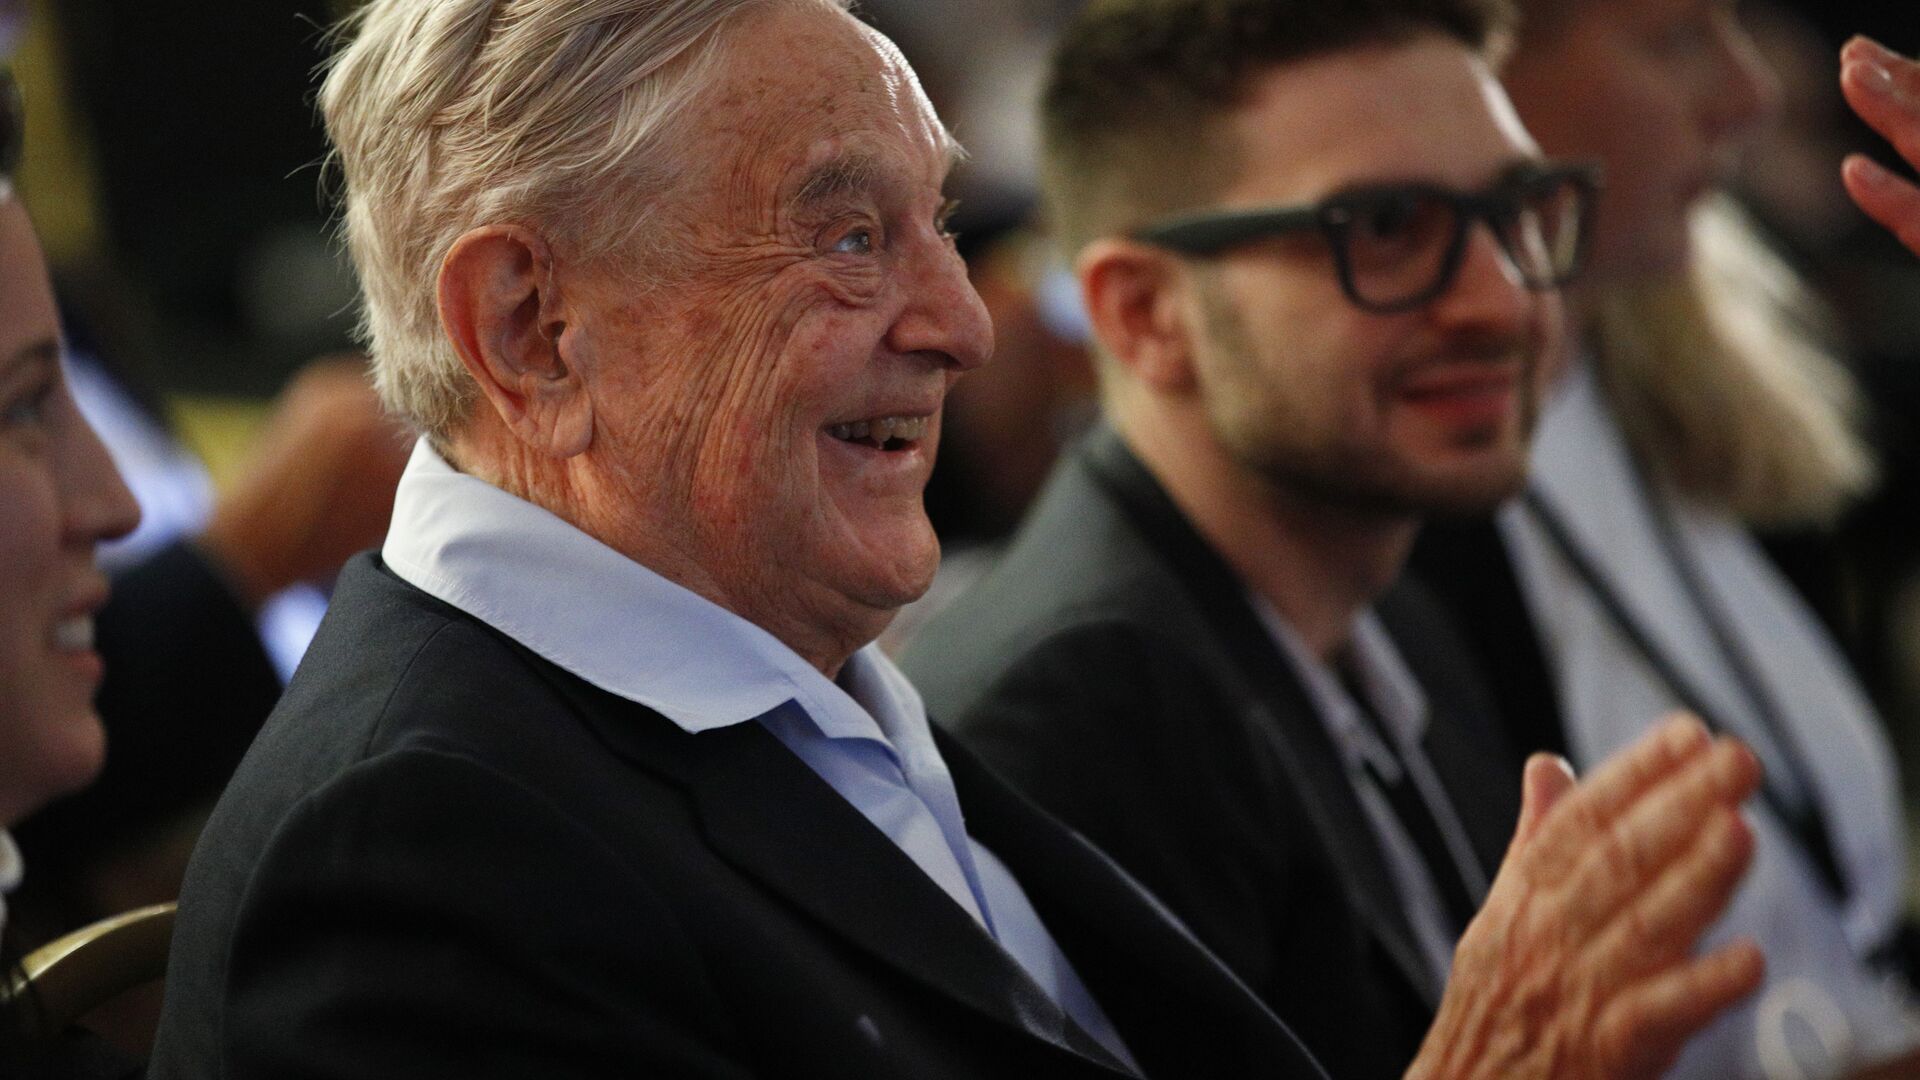 George Soros, Founder and Chairman of the Open Society Foundations attends the European Council On Foreign Relations Annual Council Meeting in Paris, Tuesday, May 29, 2018 - Sputnik International, 1920, 26.10.2021